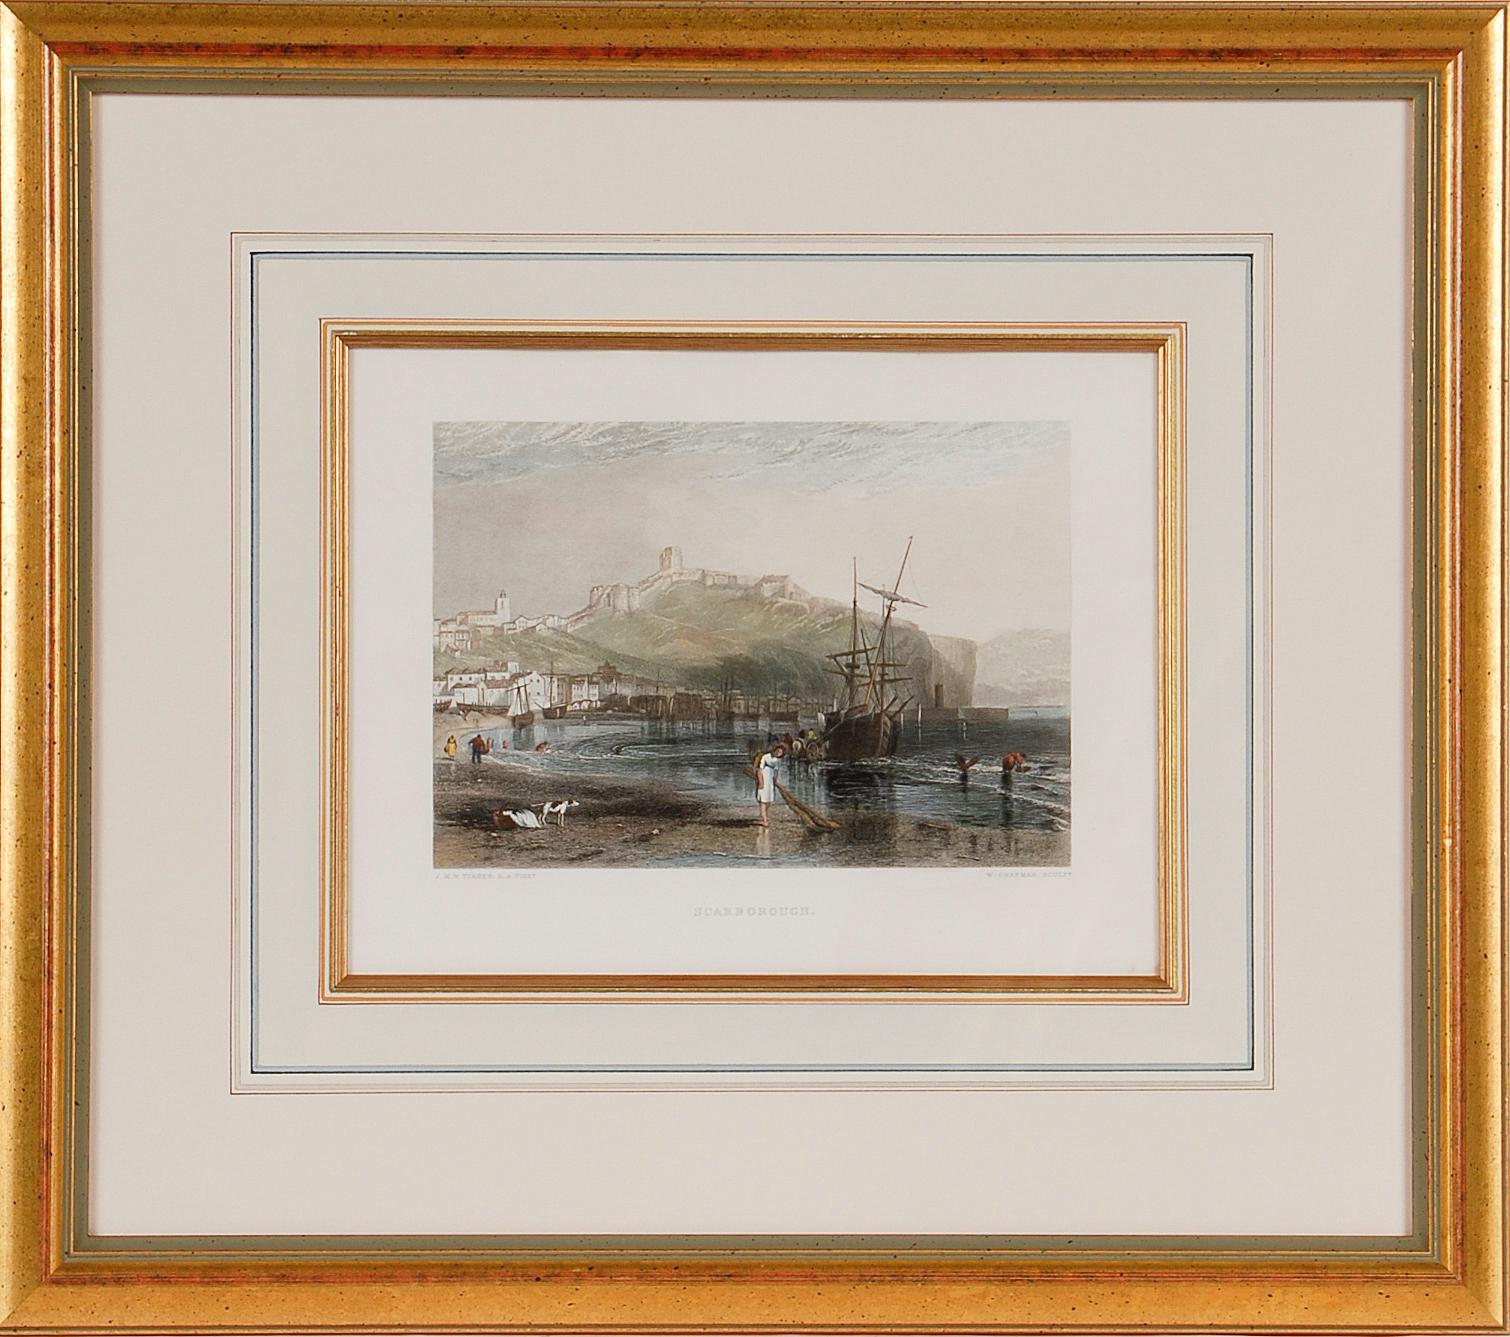 J.M.W. Turner Print - A View of Scarborough, England: A Framed 19th C. Engraving After J. M. W. Turner